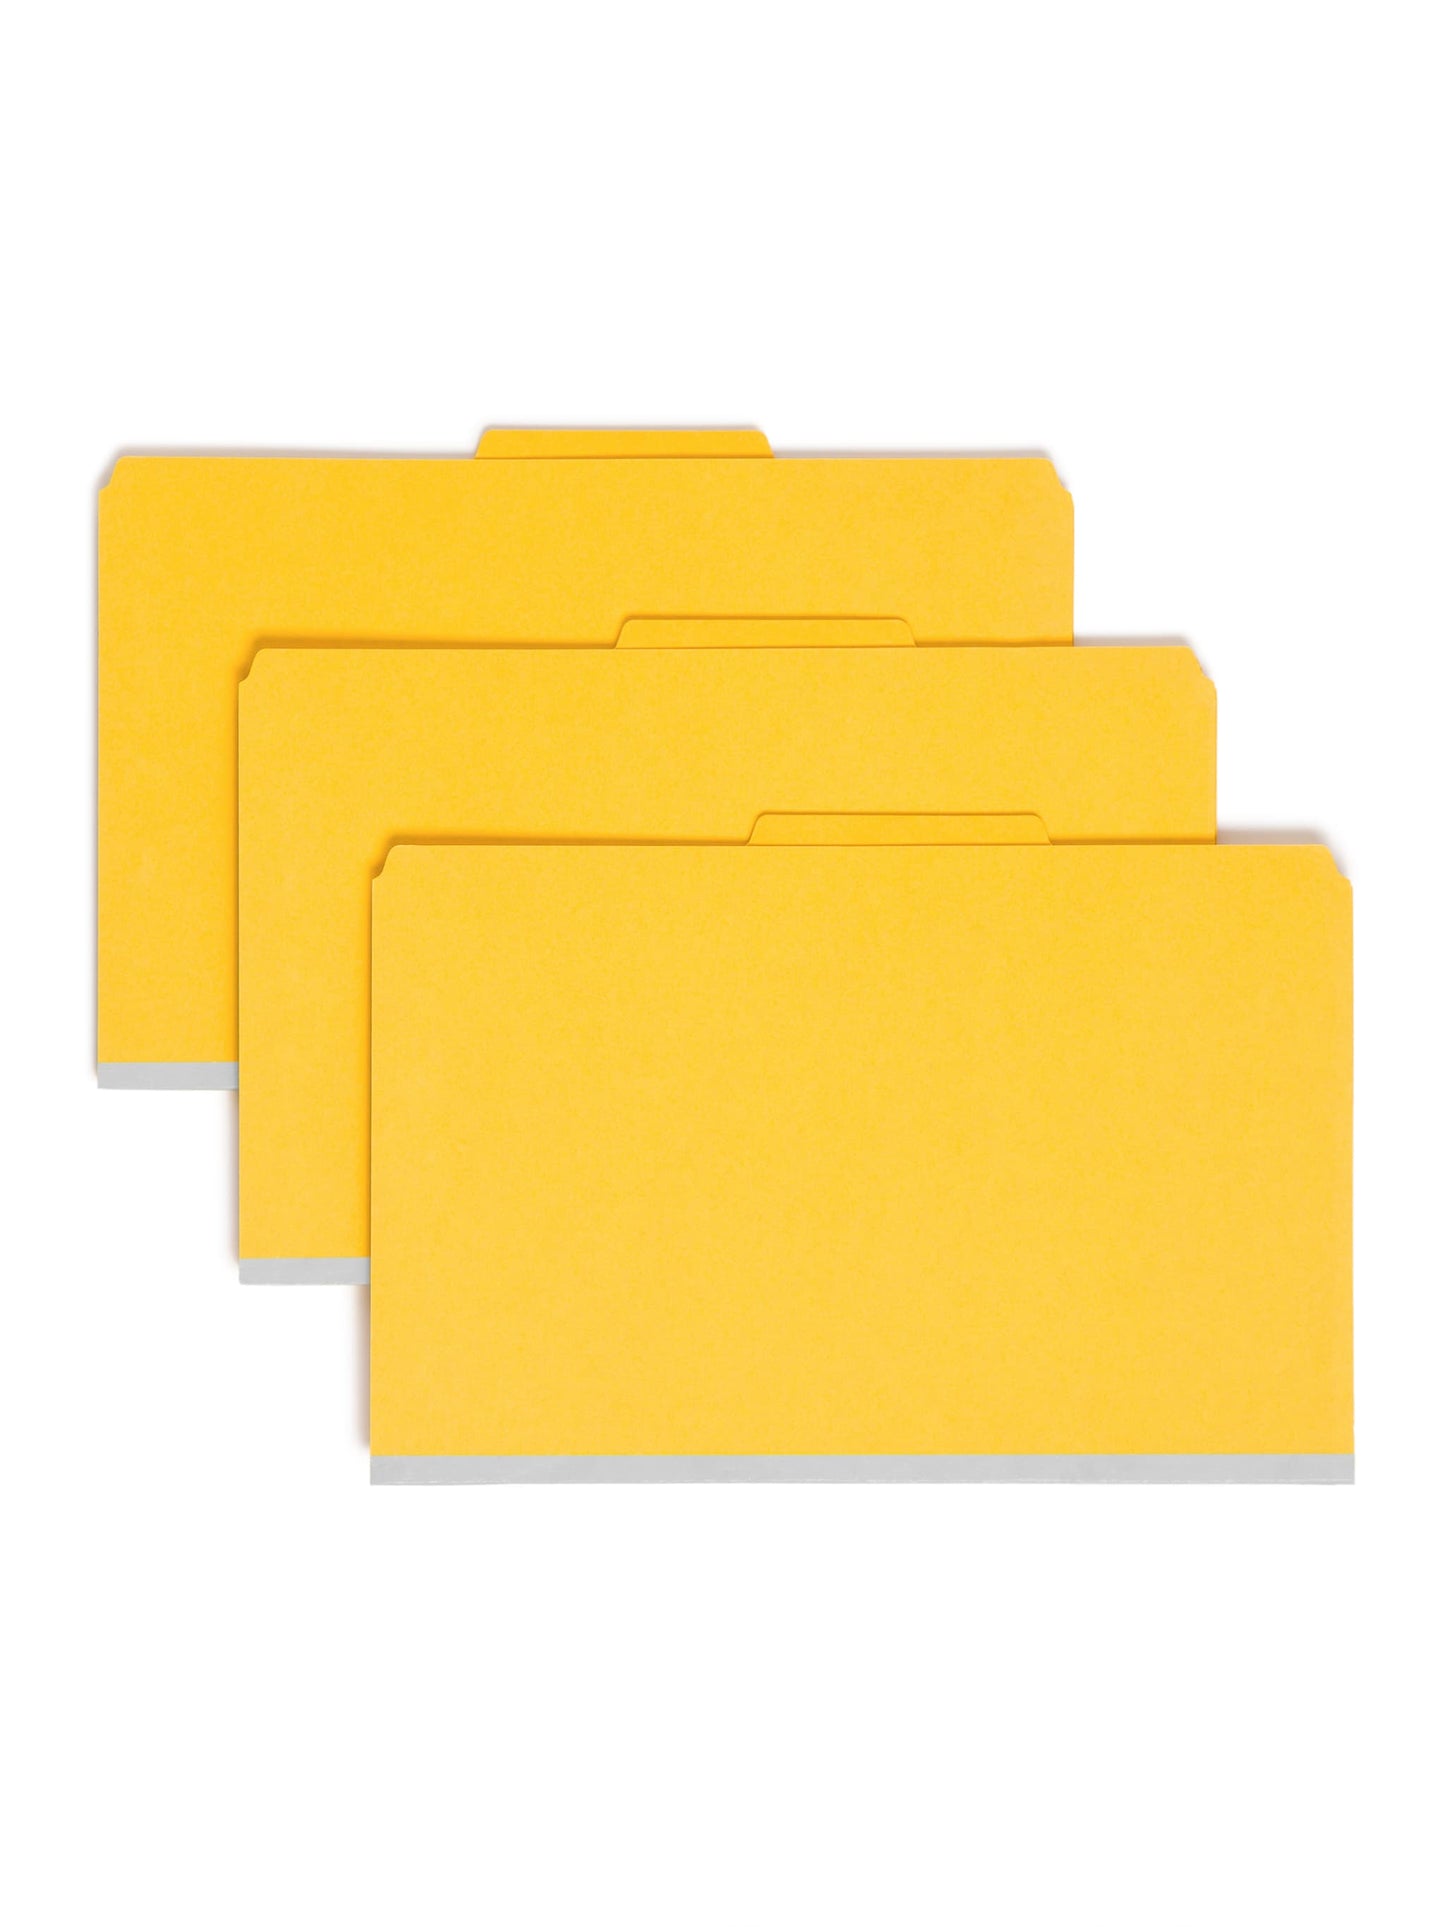 SafeSHIELD® Pressboard Classification File Folders with Pocket Dividers, Yellow Color, Legal Size, 